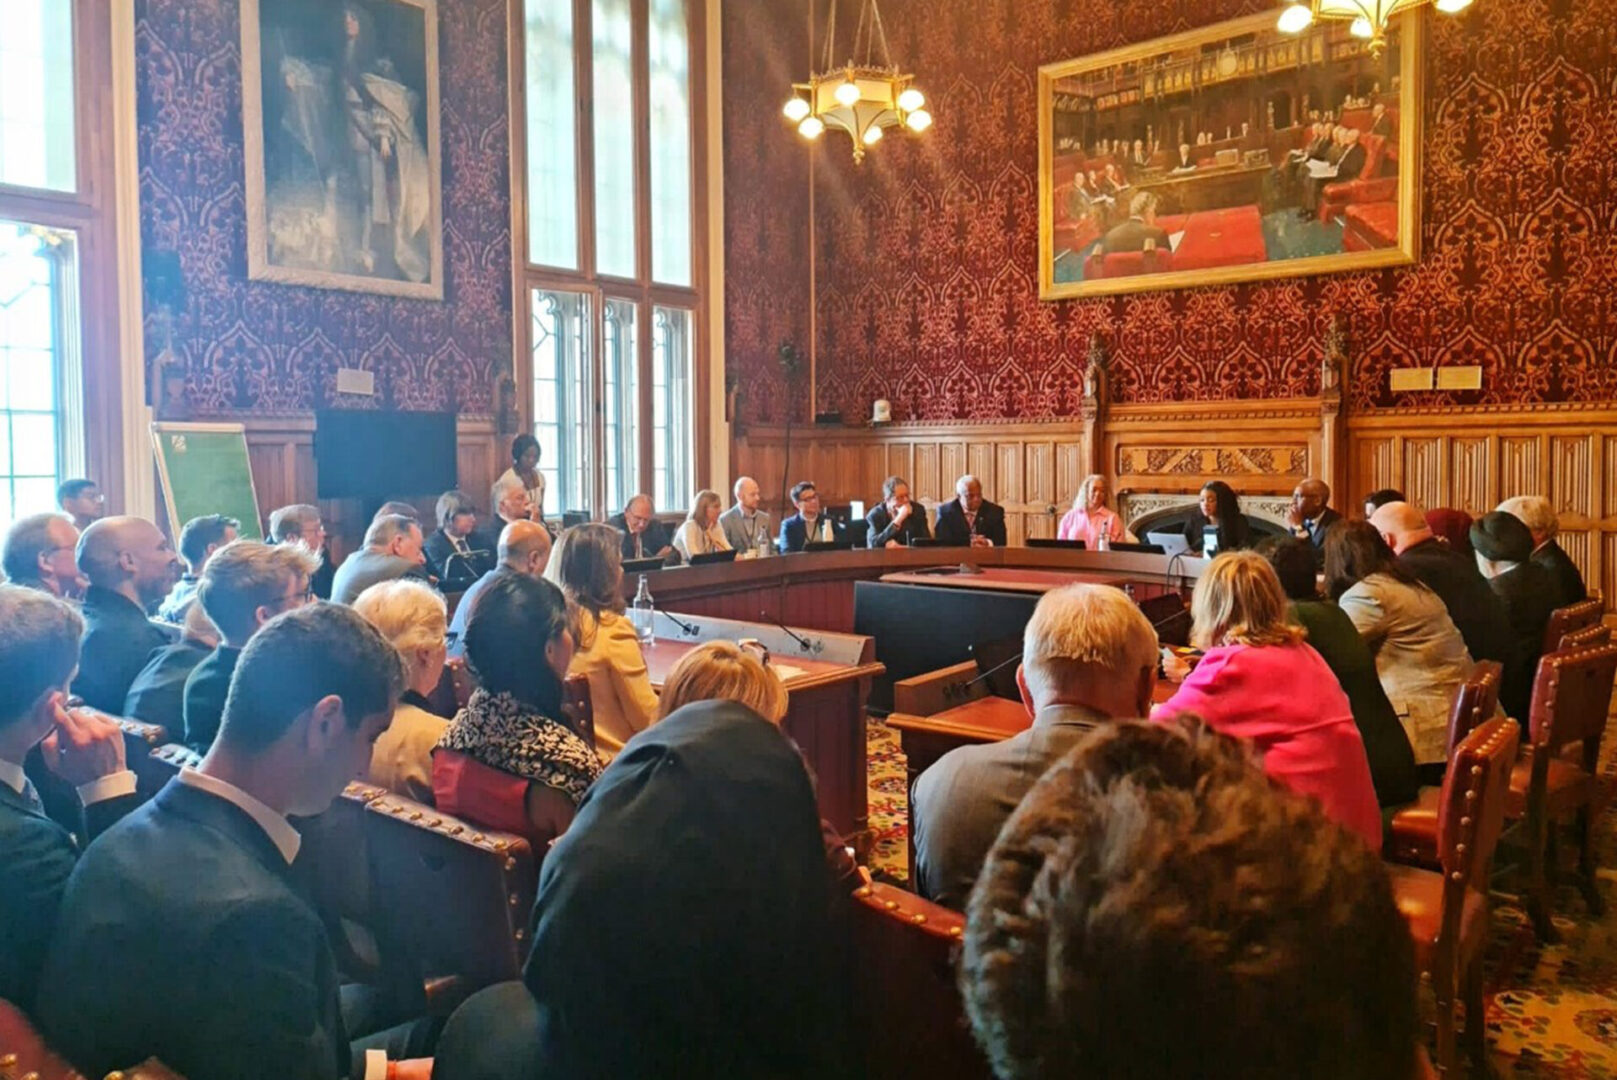 We are the secretariat of the All-Party Parliamentary Group (APPG) for Race Equality in Education at the Houses of Parliament.